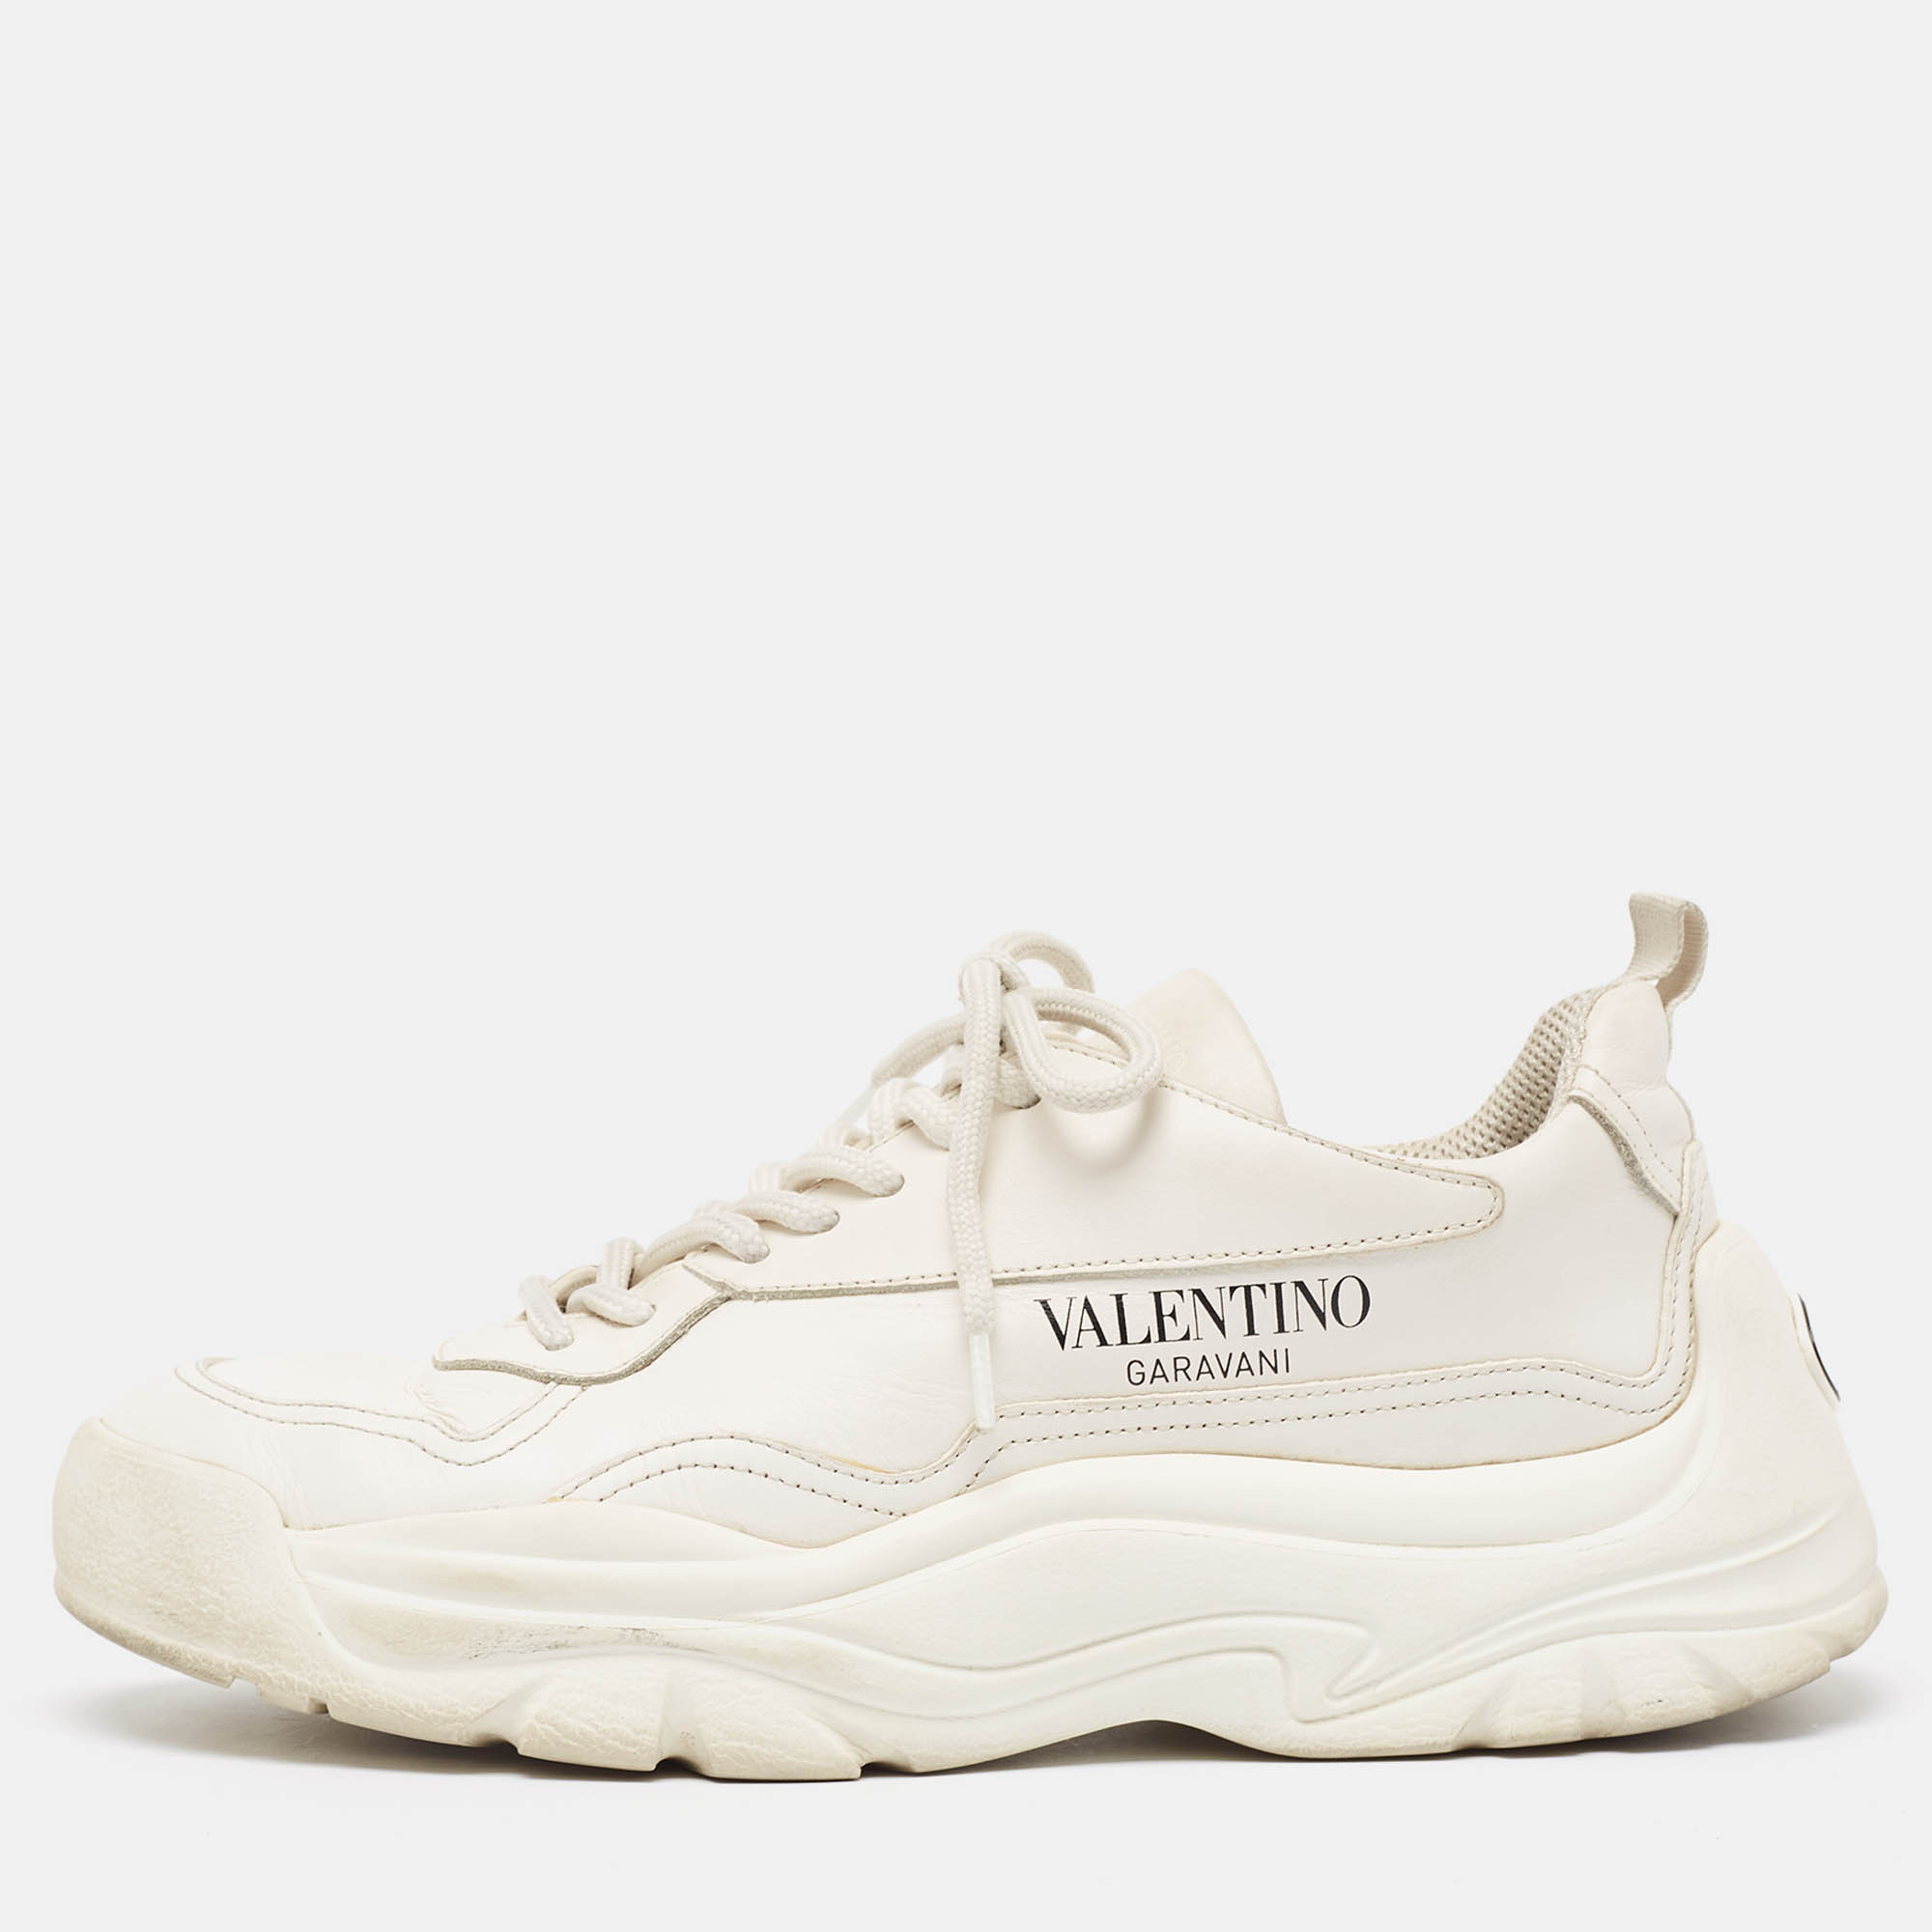 Valentino White Leather Gumboy Sneakers Size 38